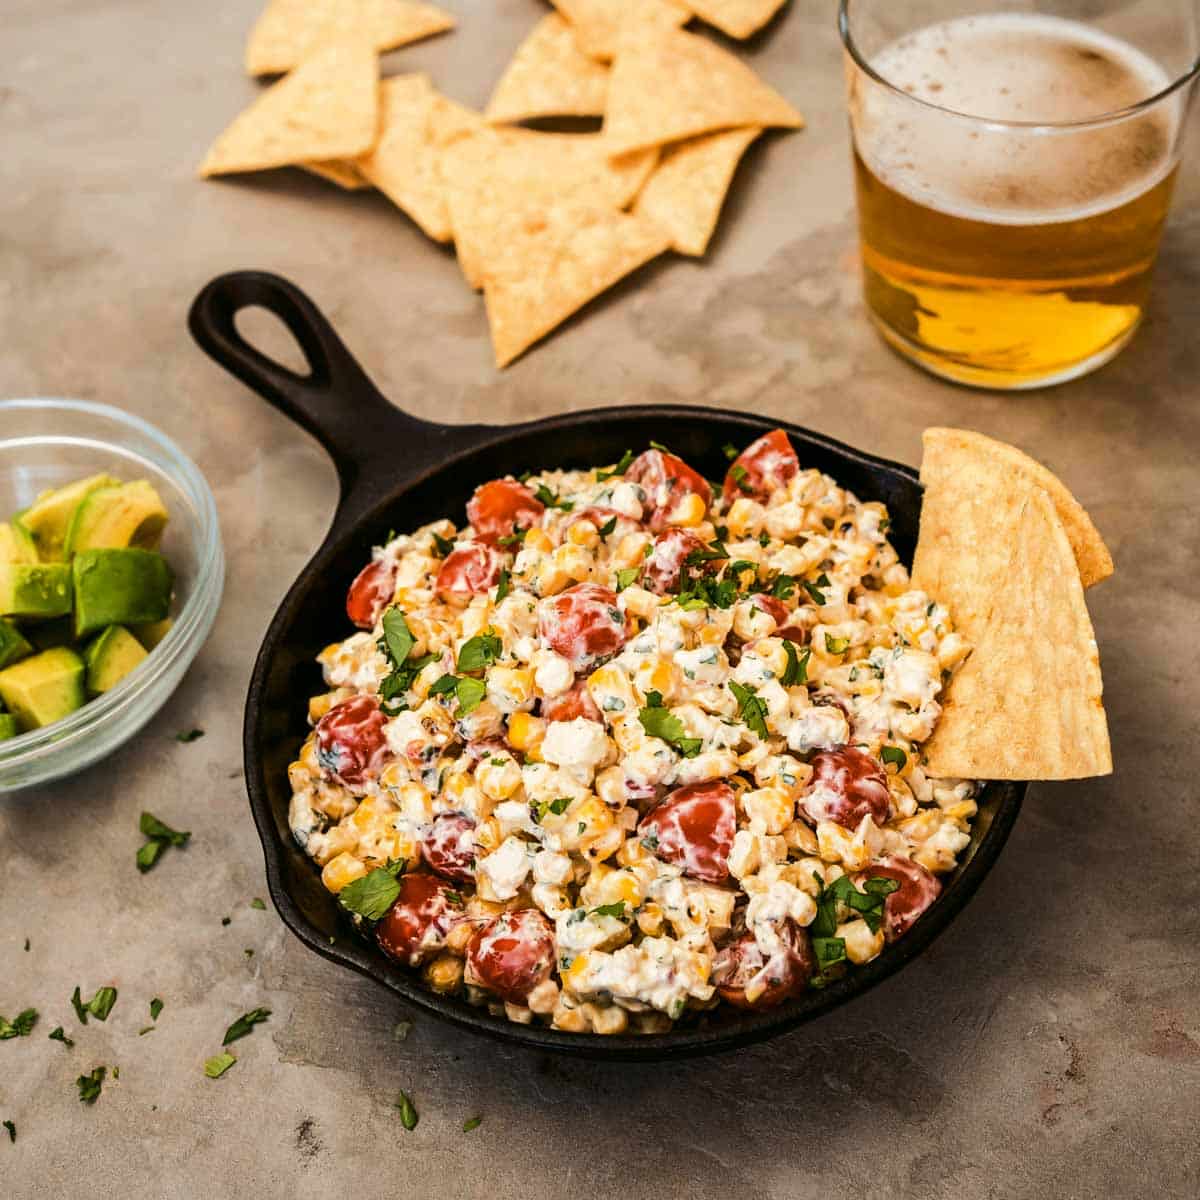 Corn dip in a cast iron skillet next to a glass of beer, chips, and avocado.